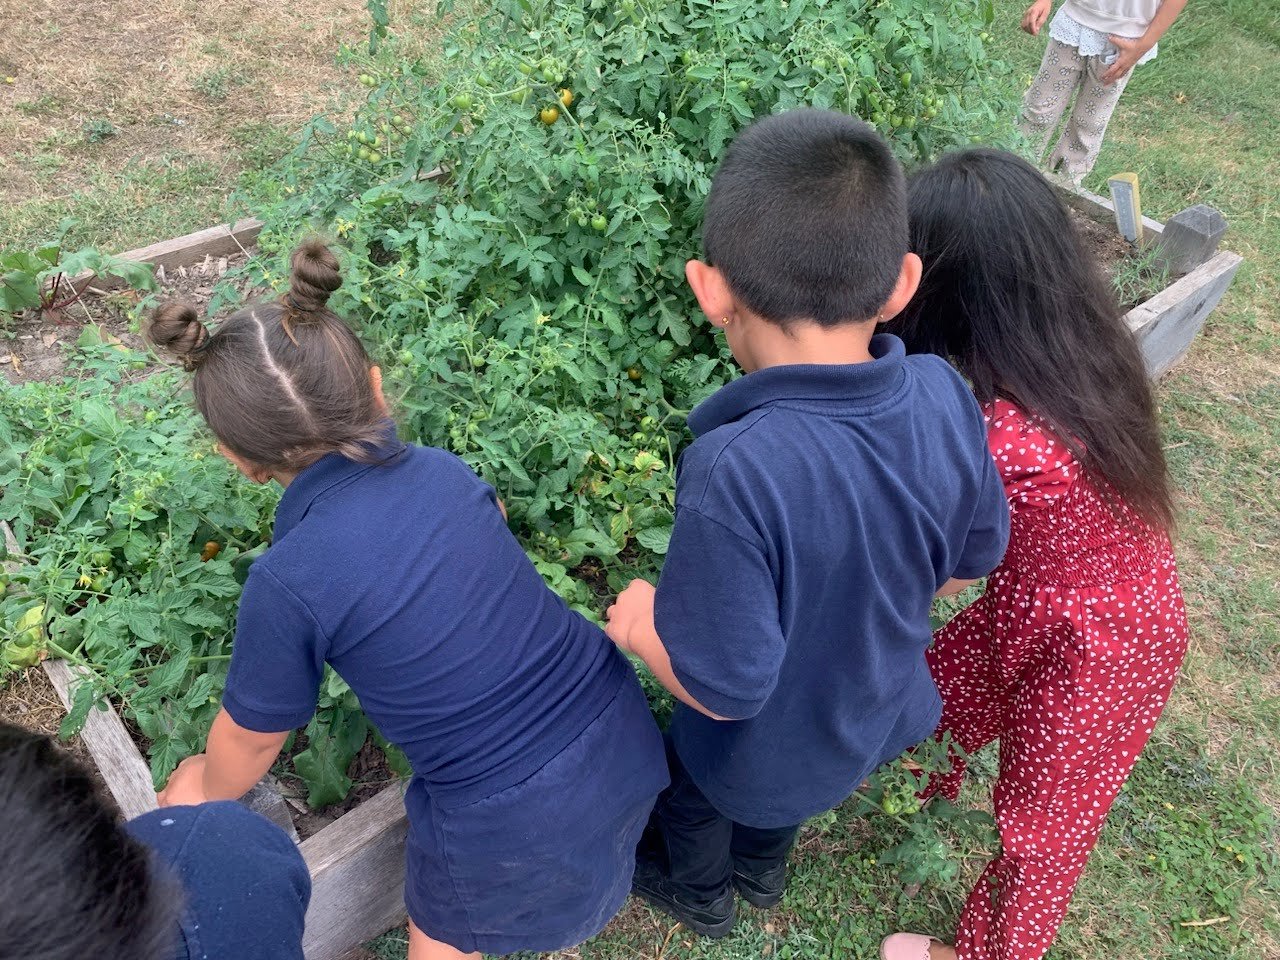 Education Thursday 🌱 This week in our afterschool programs, the kids embarked on a thrilling tomato adventure, diving into a harvest of ripe cherry tomatoes! 🍅 With each pluck from the vine, they discovered a burst of vibrant flavor, perfect for ex